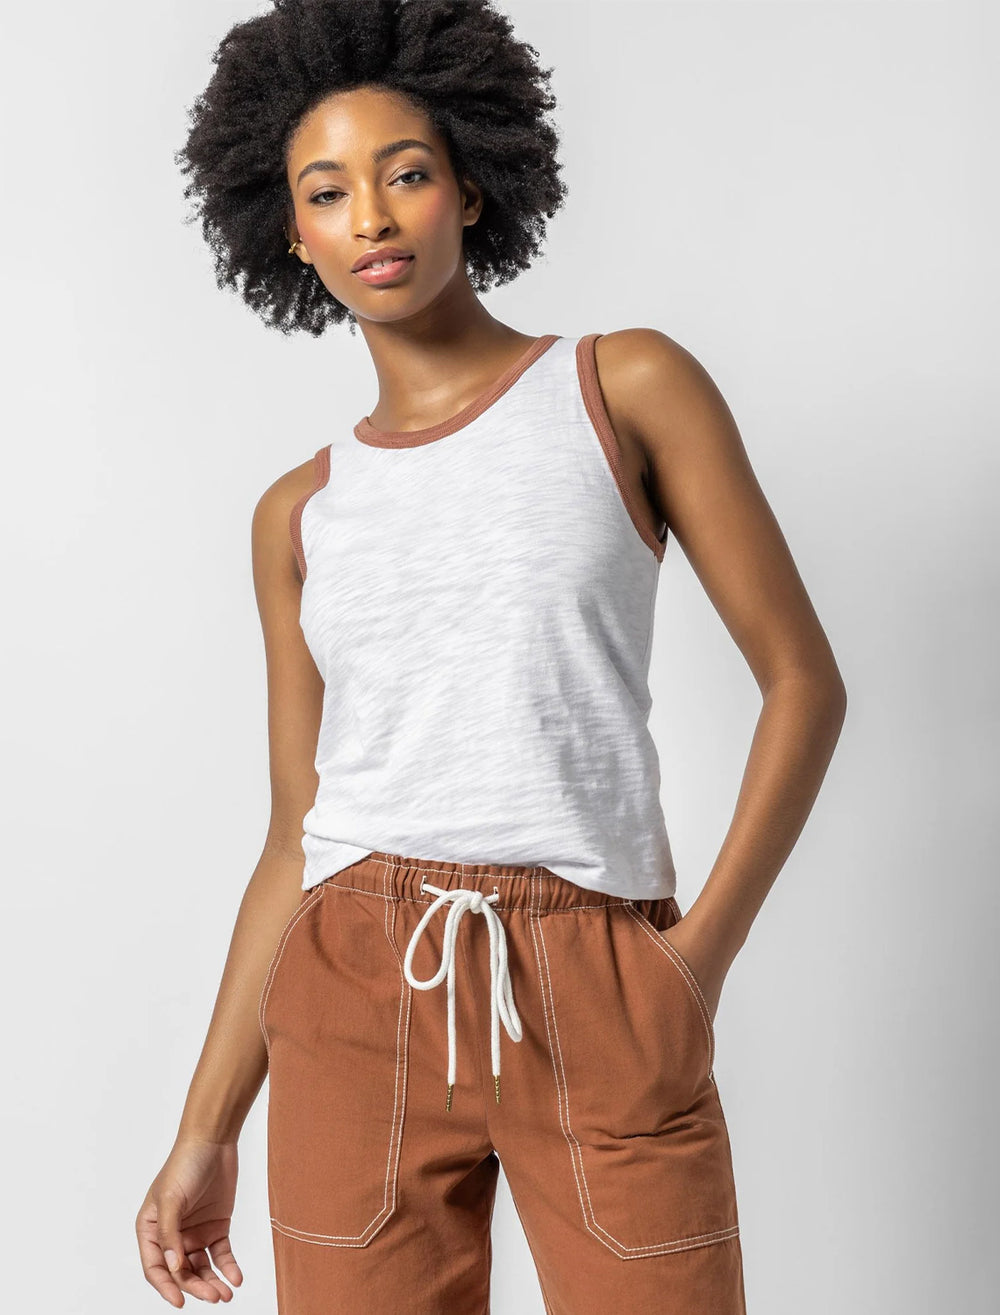 Model wearing Lilla P.'s colorblock tank in white and burnt sienna.